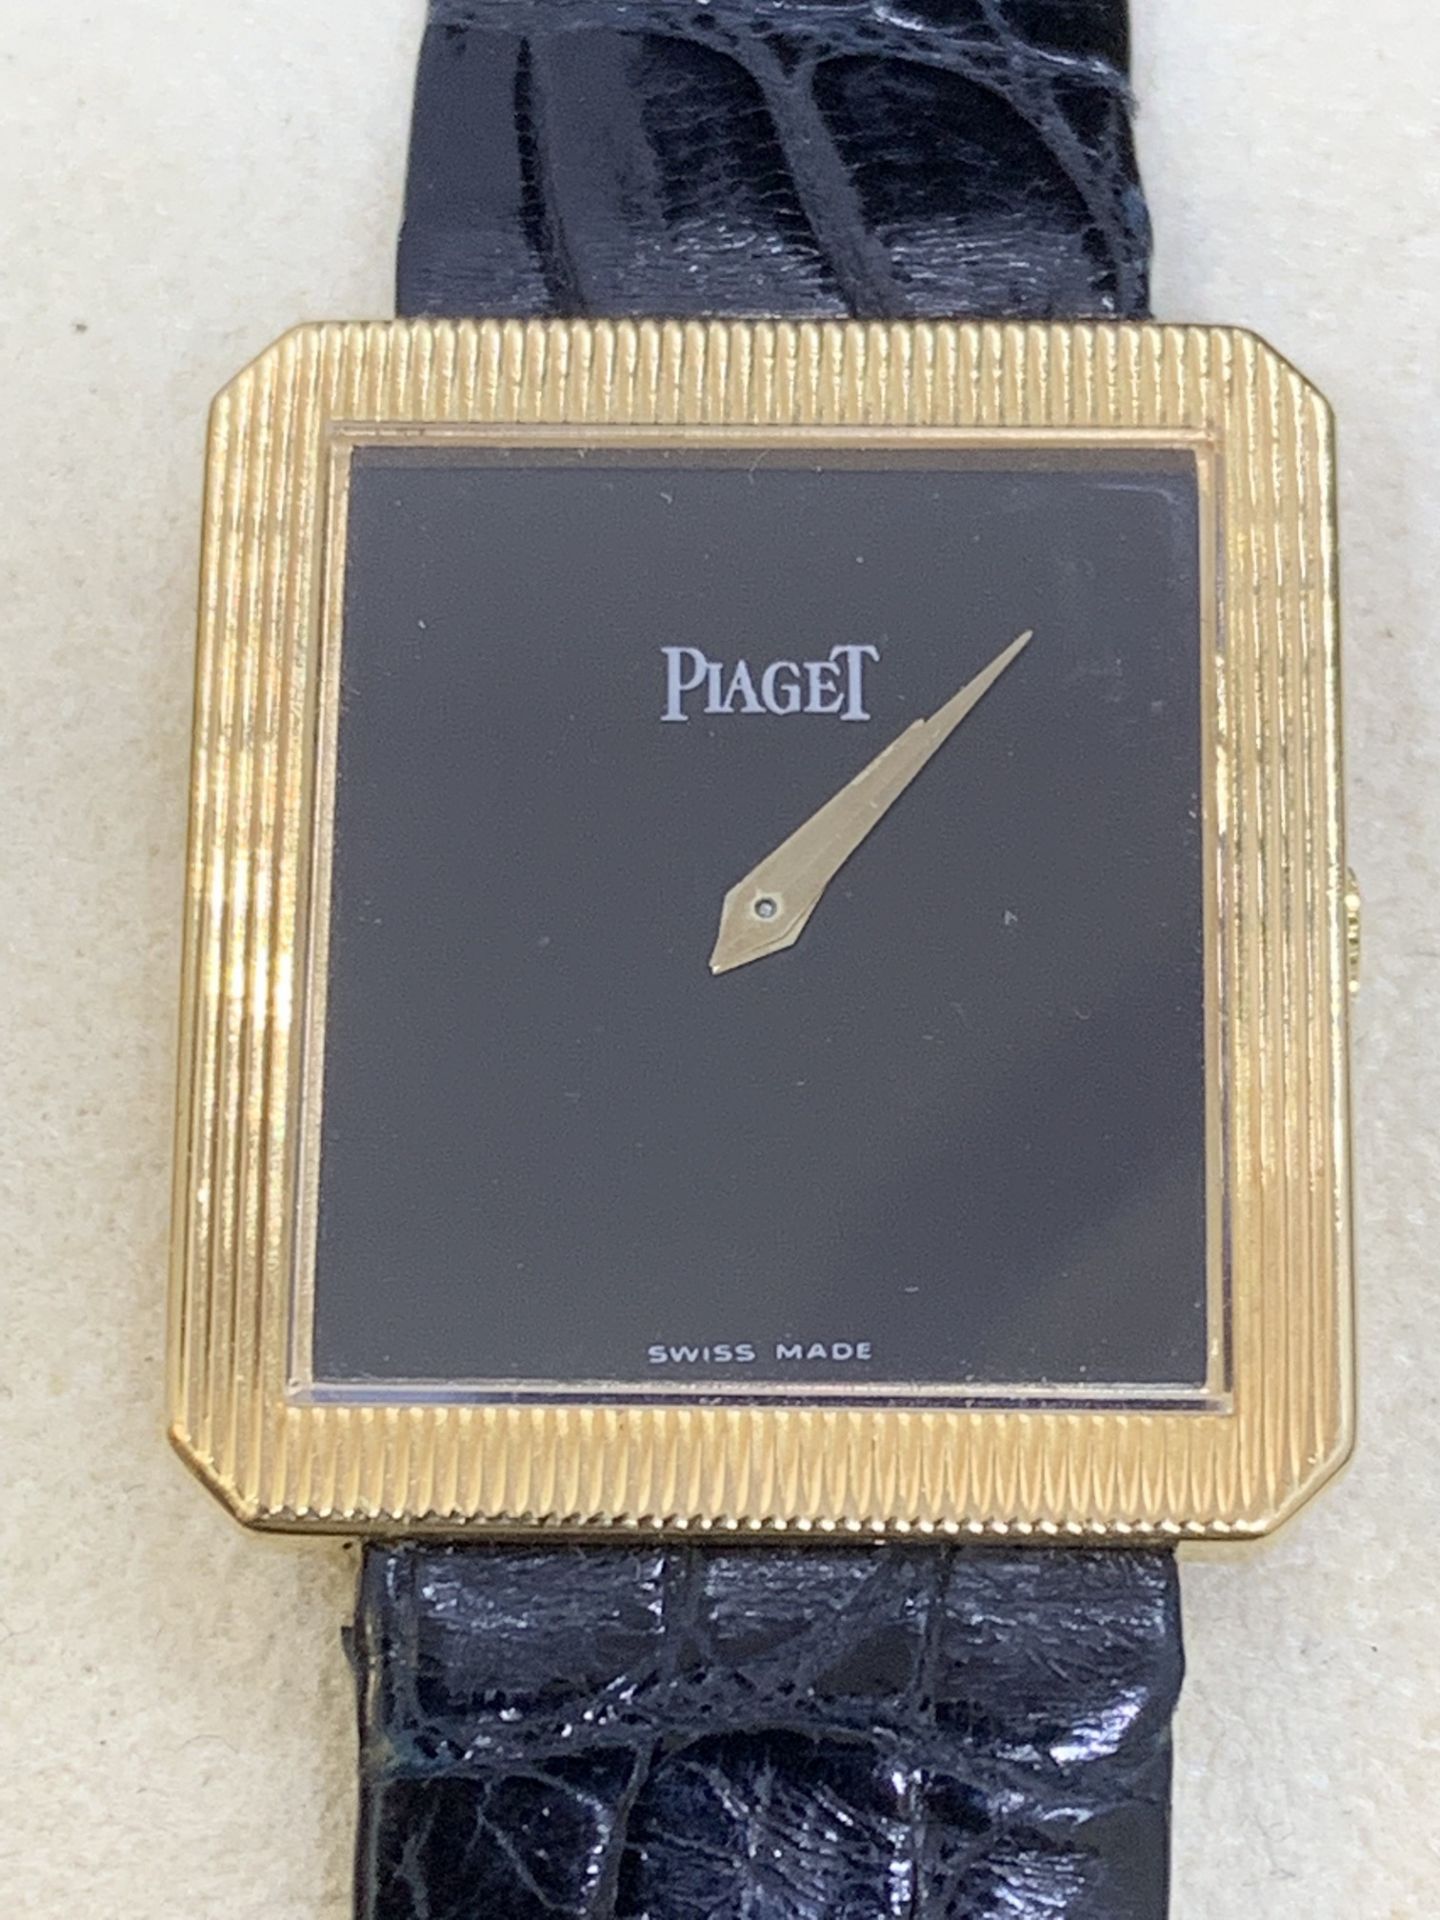 PIAGET 18ct GOLD SQUARE FACE WATCH